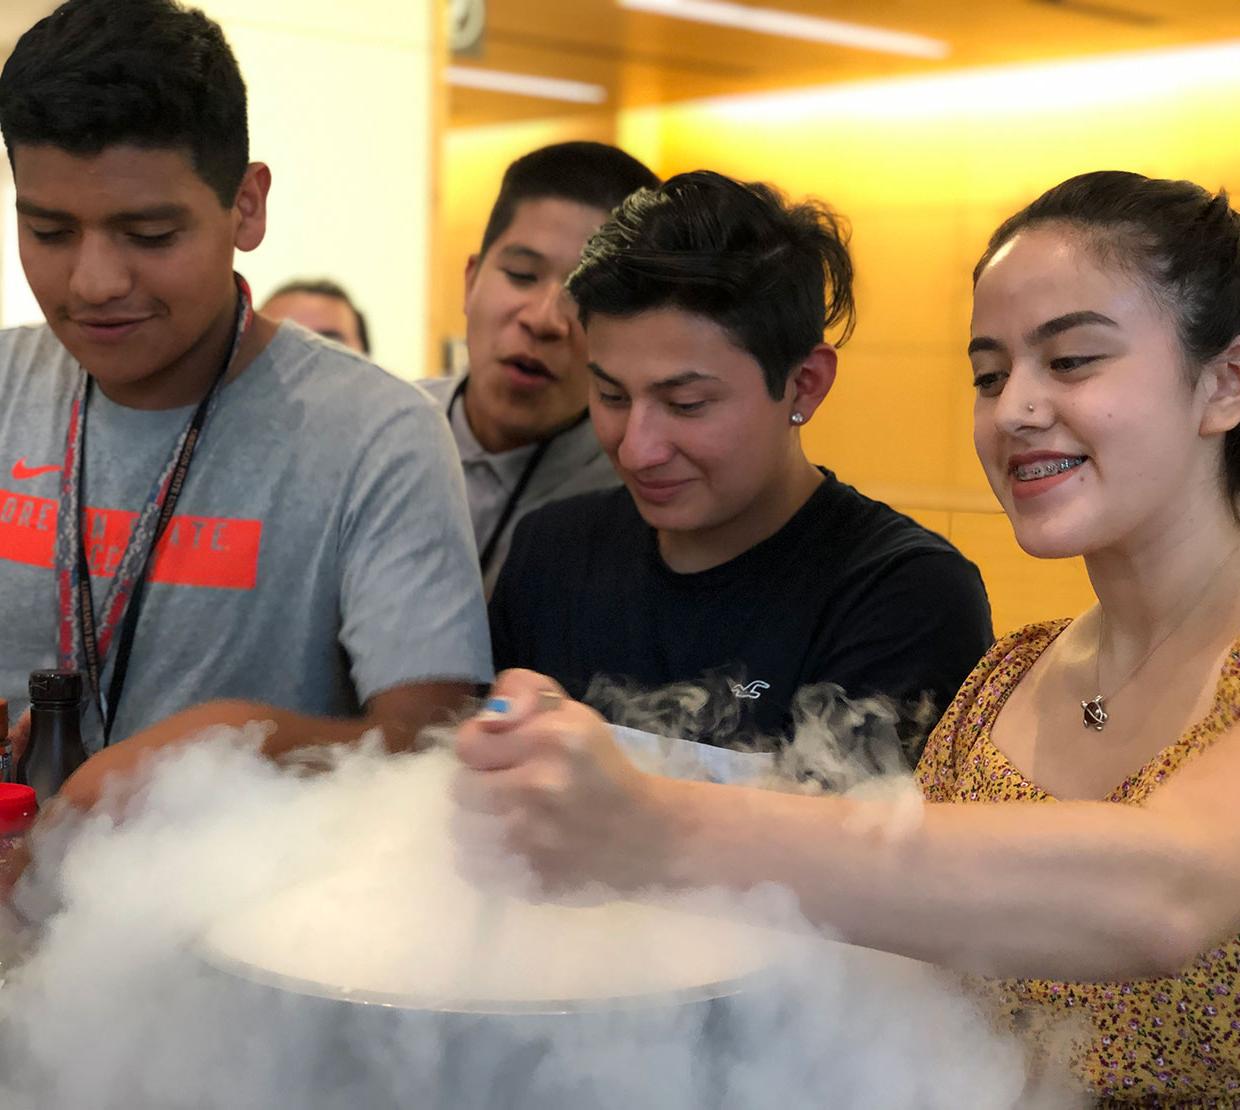 Juntos students experimenting with gas